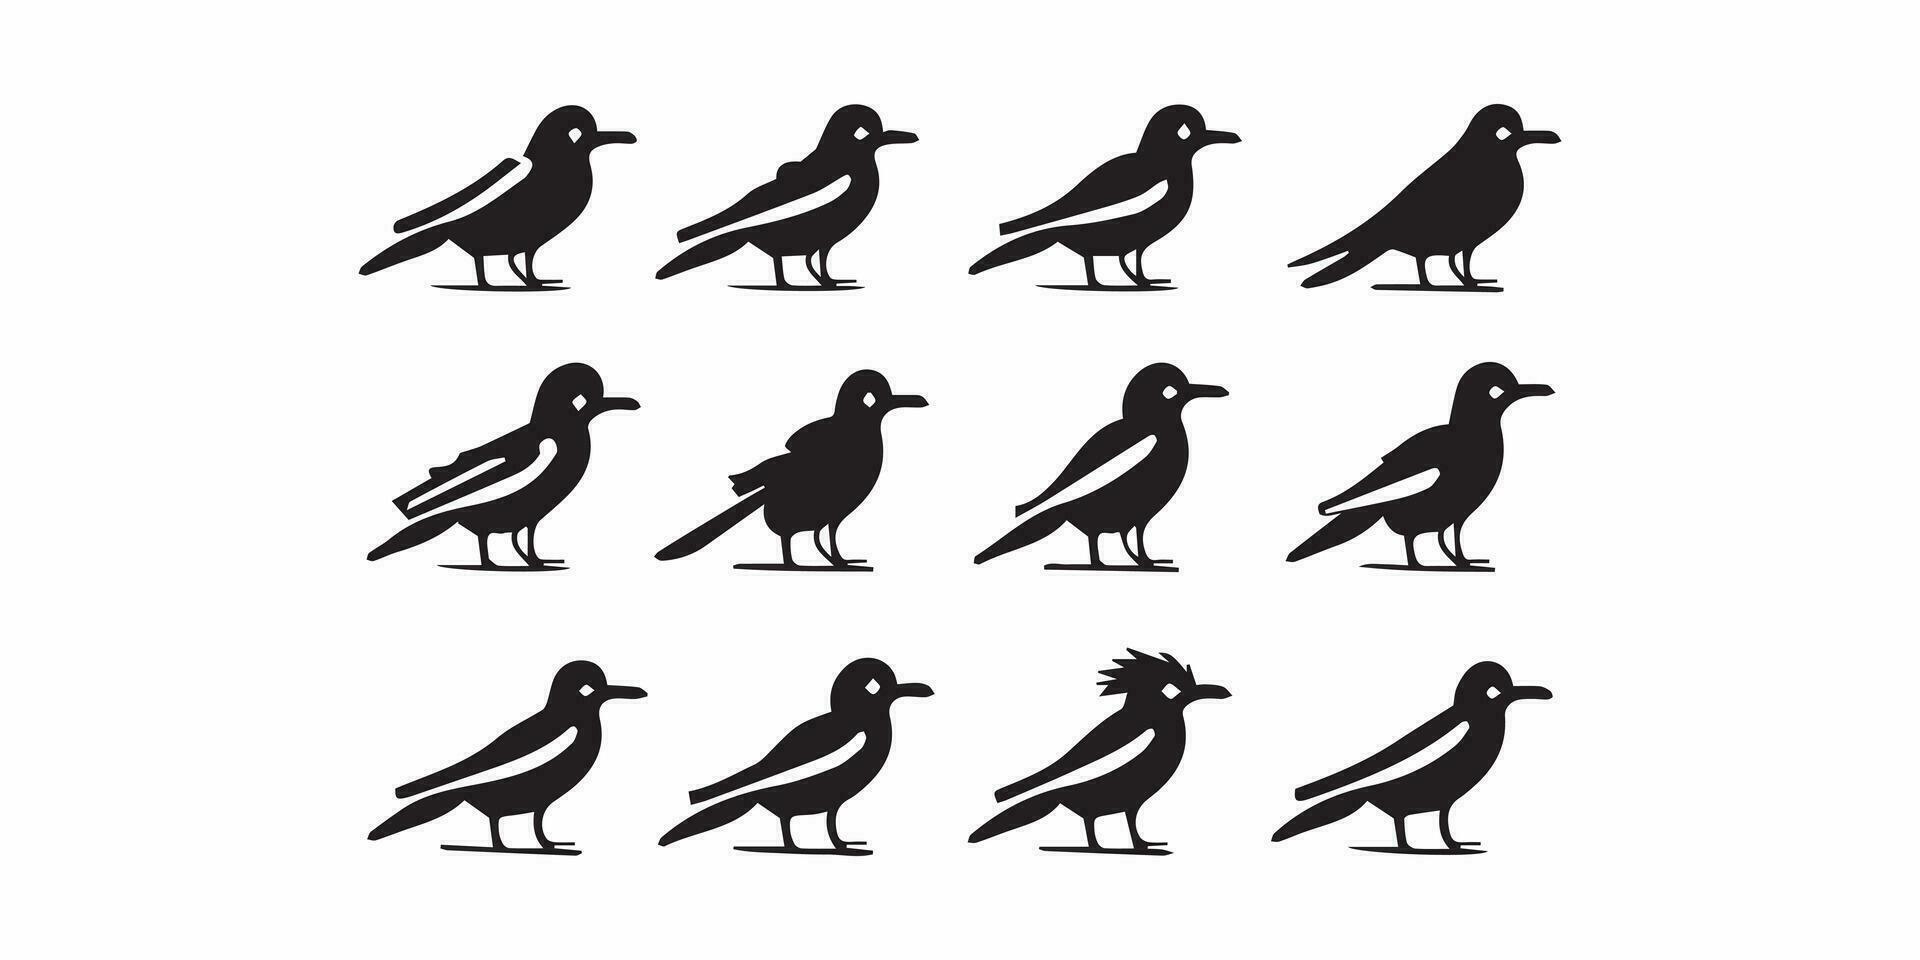 Tropical wild bird black silhouettes icons set isolated vector illustration